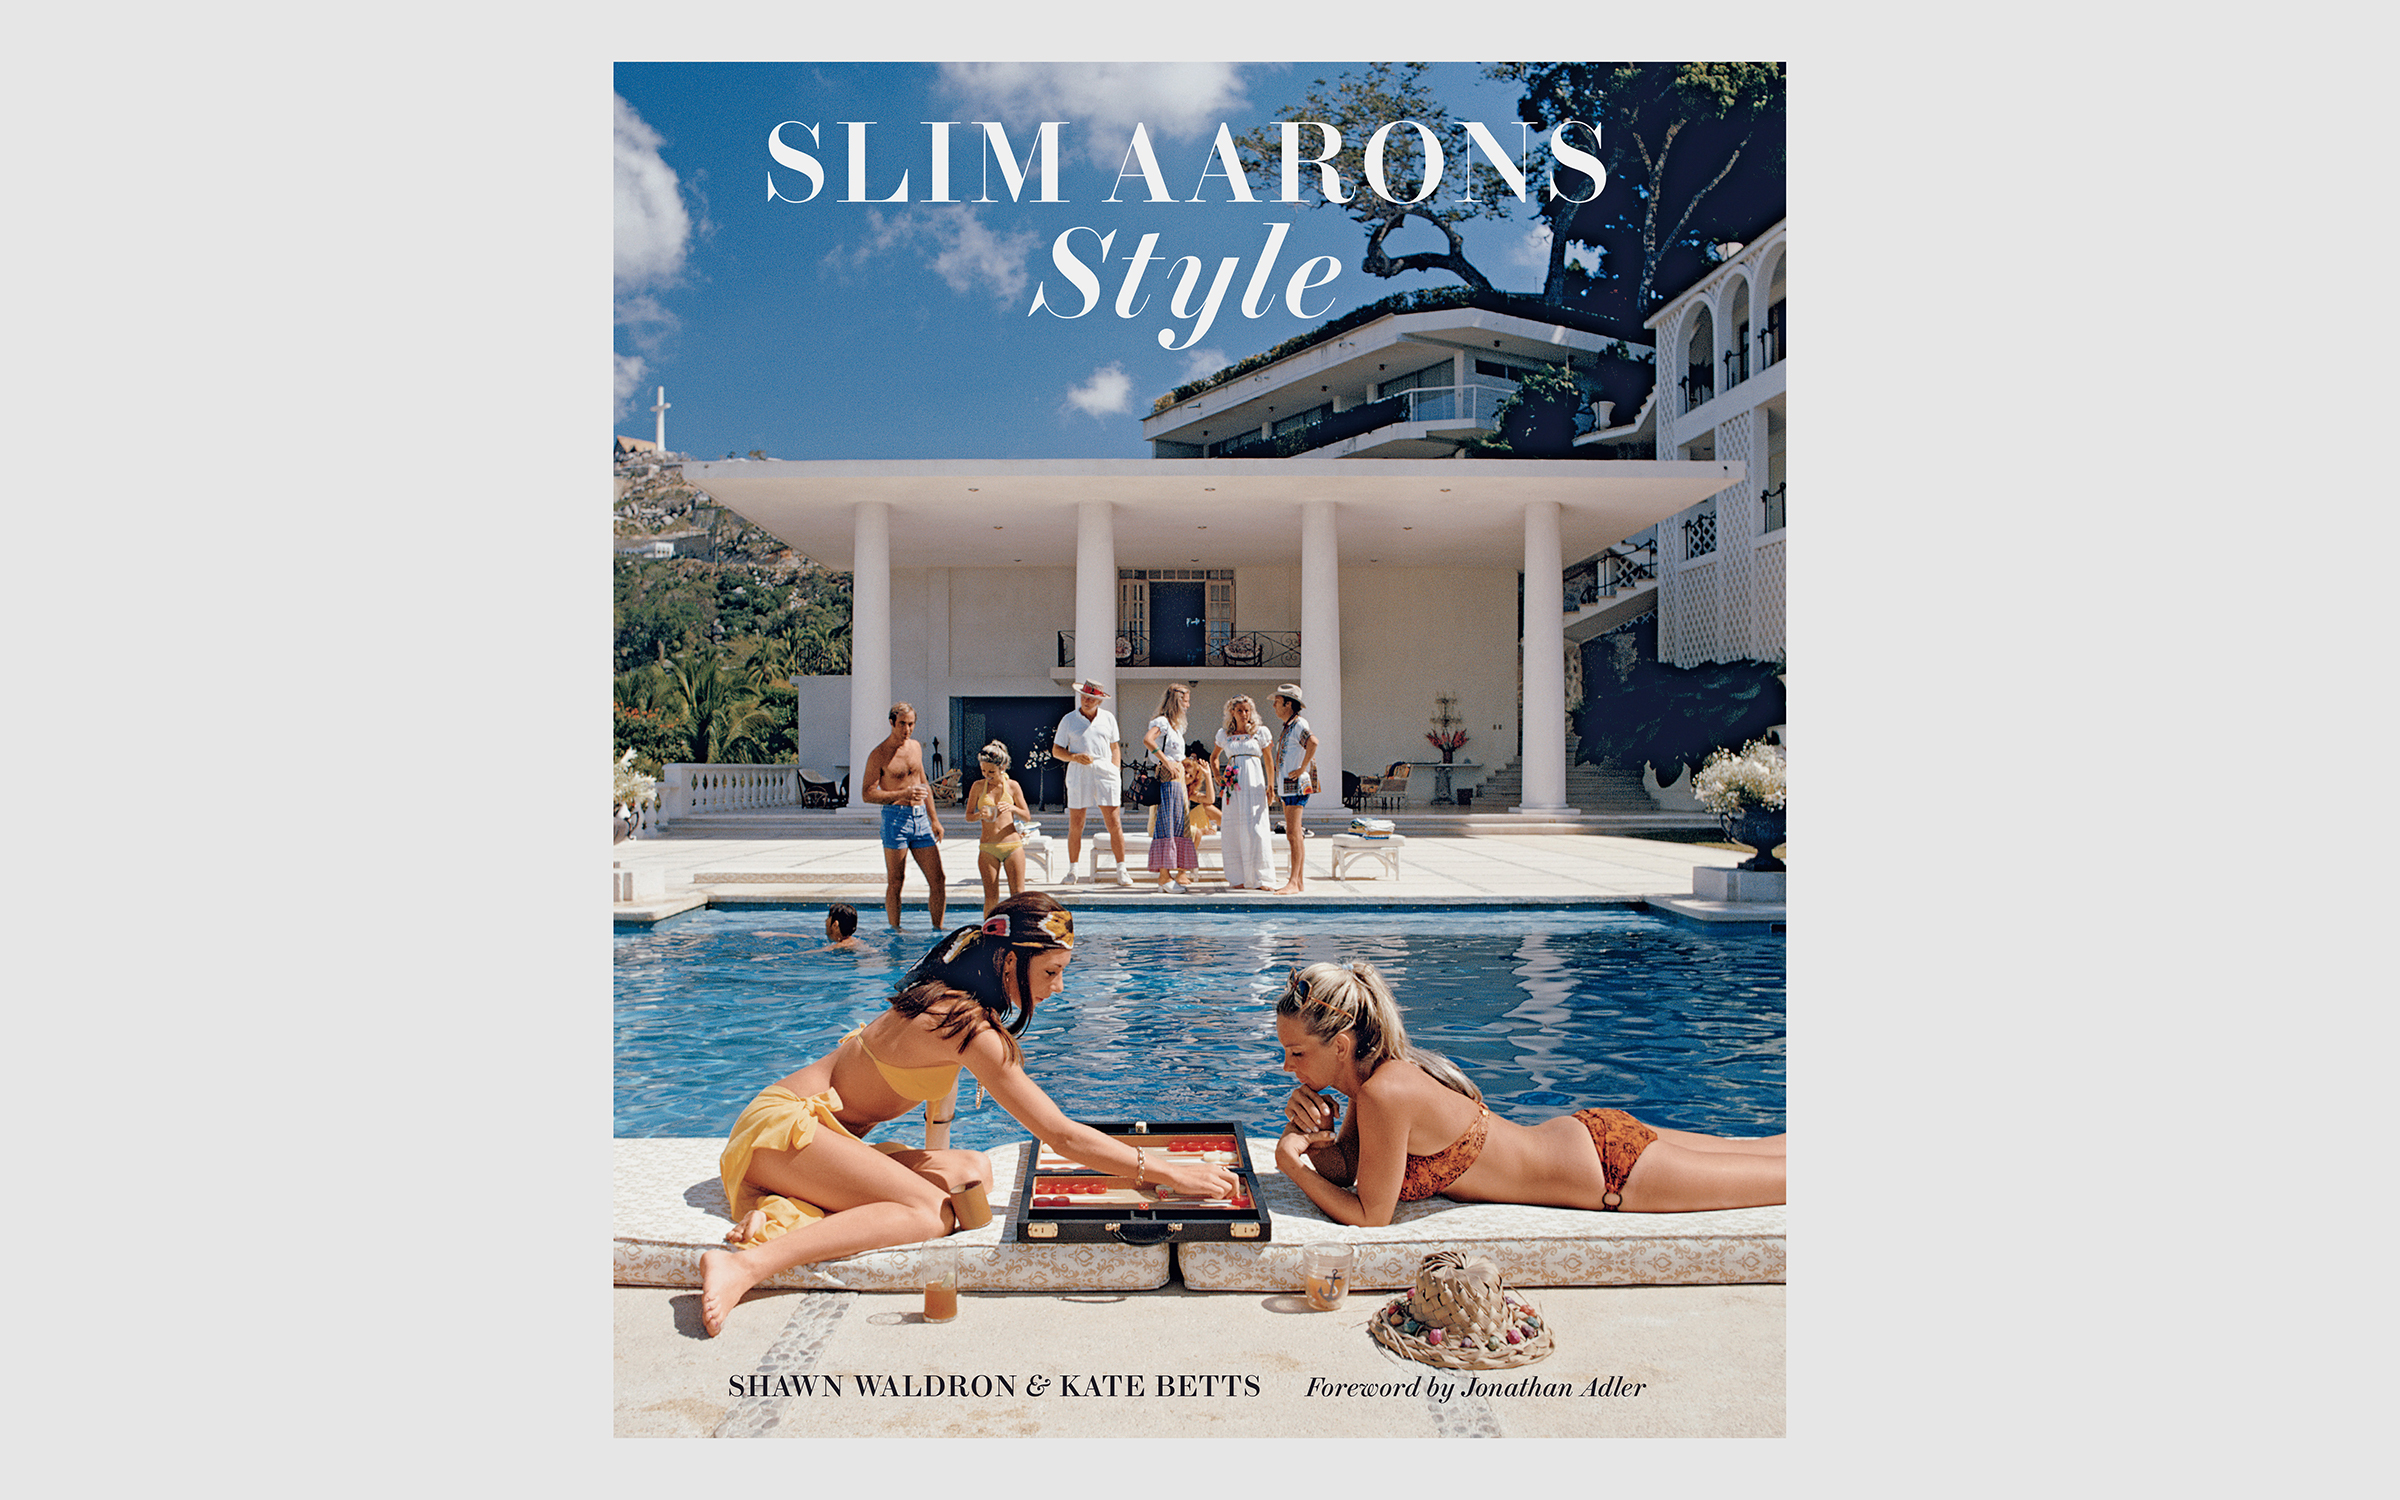 The cover of Slim Aarons: Style, the latest chapter of books featuring the lost world Aarons captured. It features women in bikinis lounging by a pool